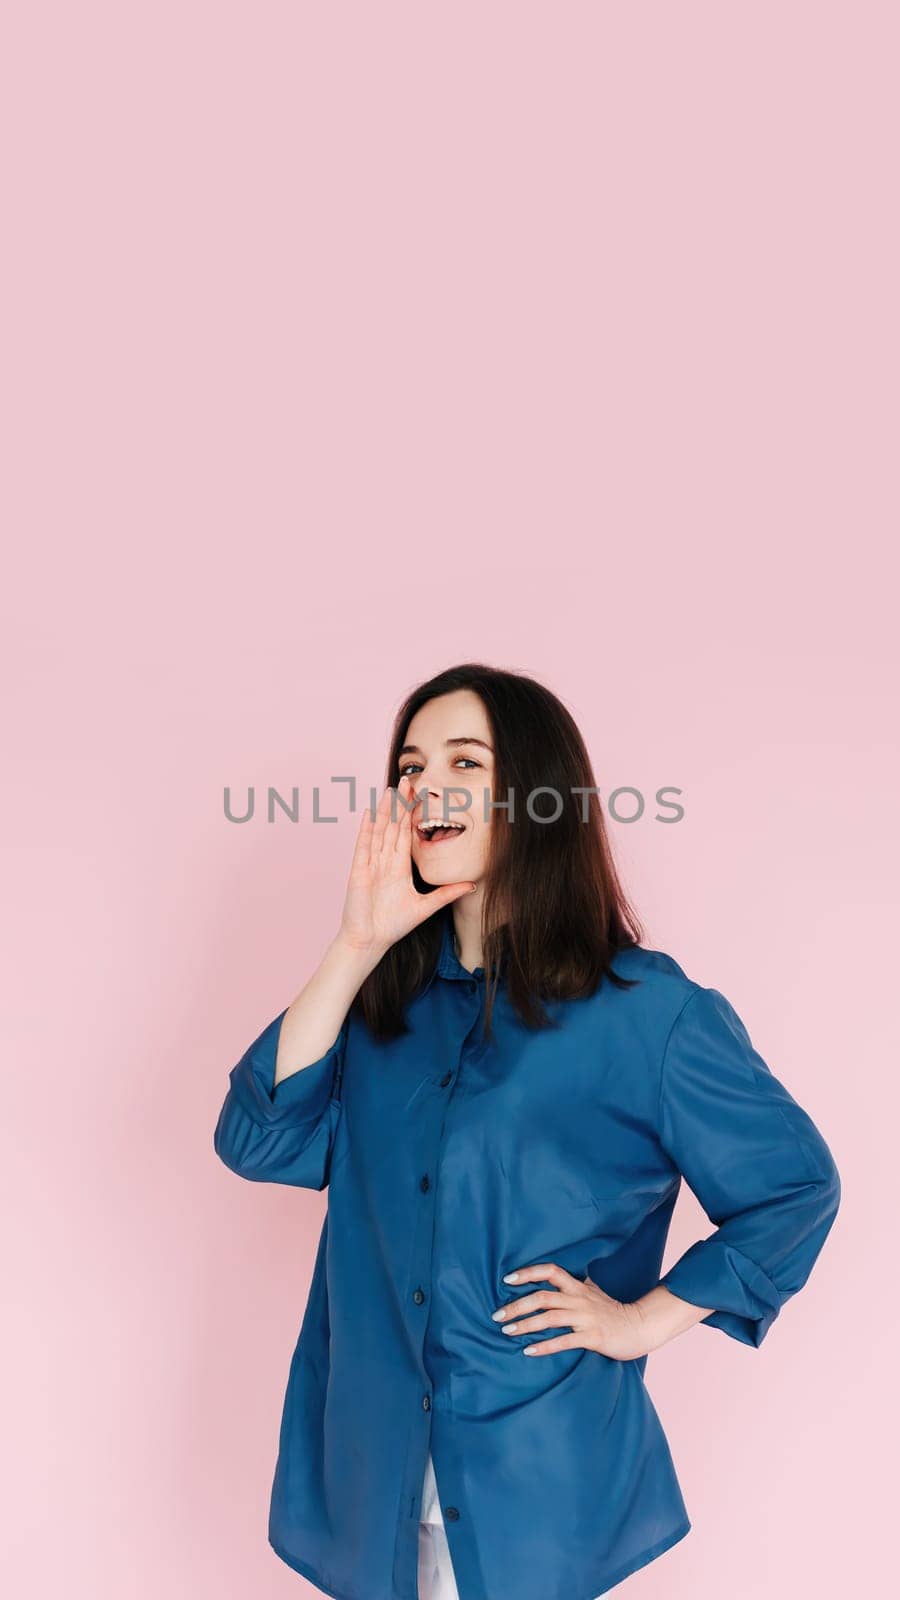 Excited Girl Sharing Breaking News: Hand Near Open Mouth Conveying Surprise and Delivering Important Information in an Empty Space, Isolated on a Pink Background.